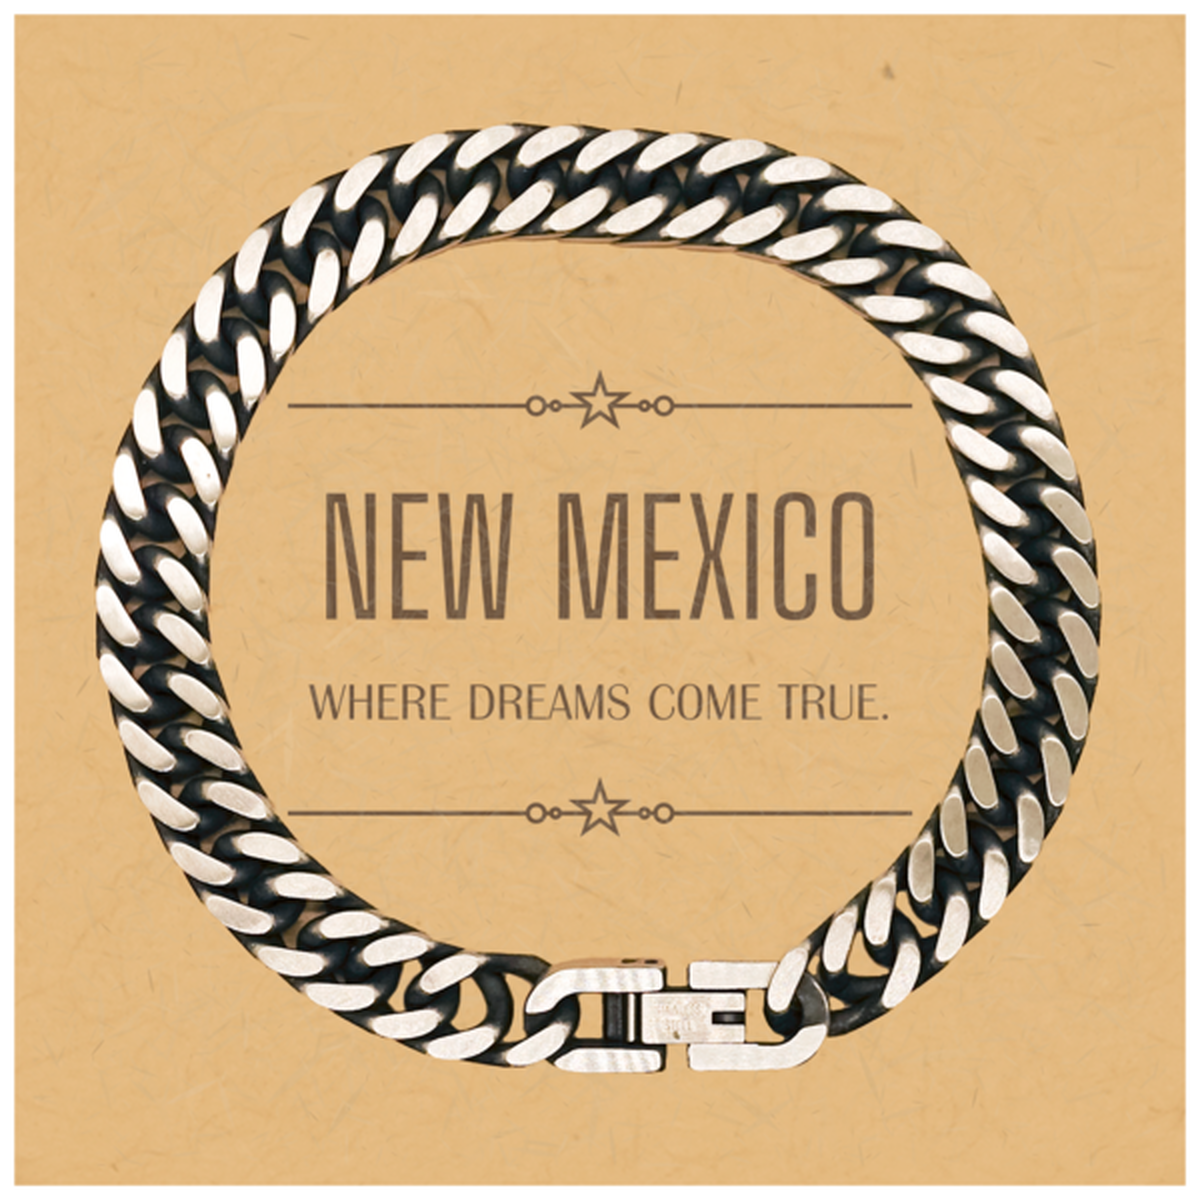 Love New Mexico State Cuban Link Chain Bracelet, New Mexico Where dreams come true, Birthday Christmas Inspirational Gifts For New Mexico Men, Women, Friends